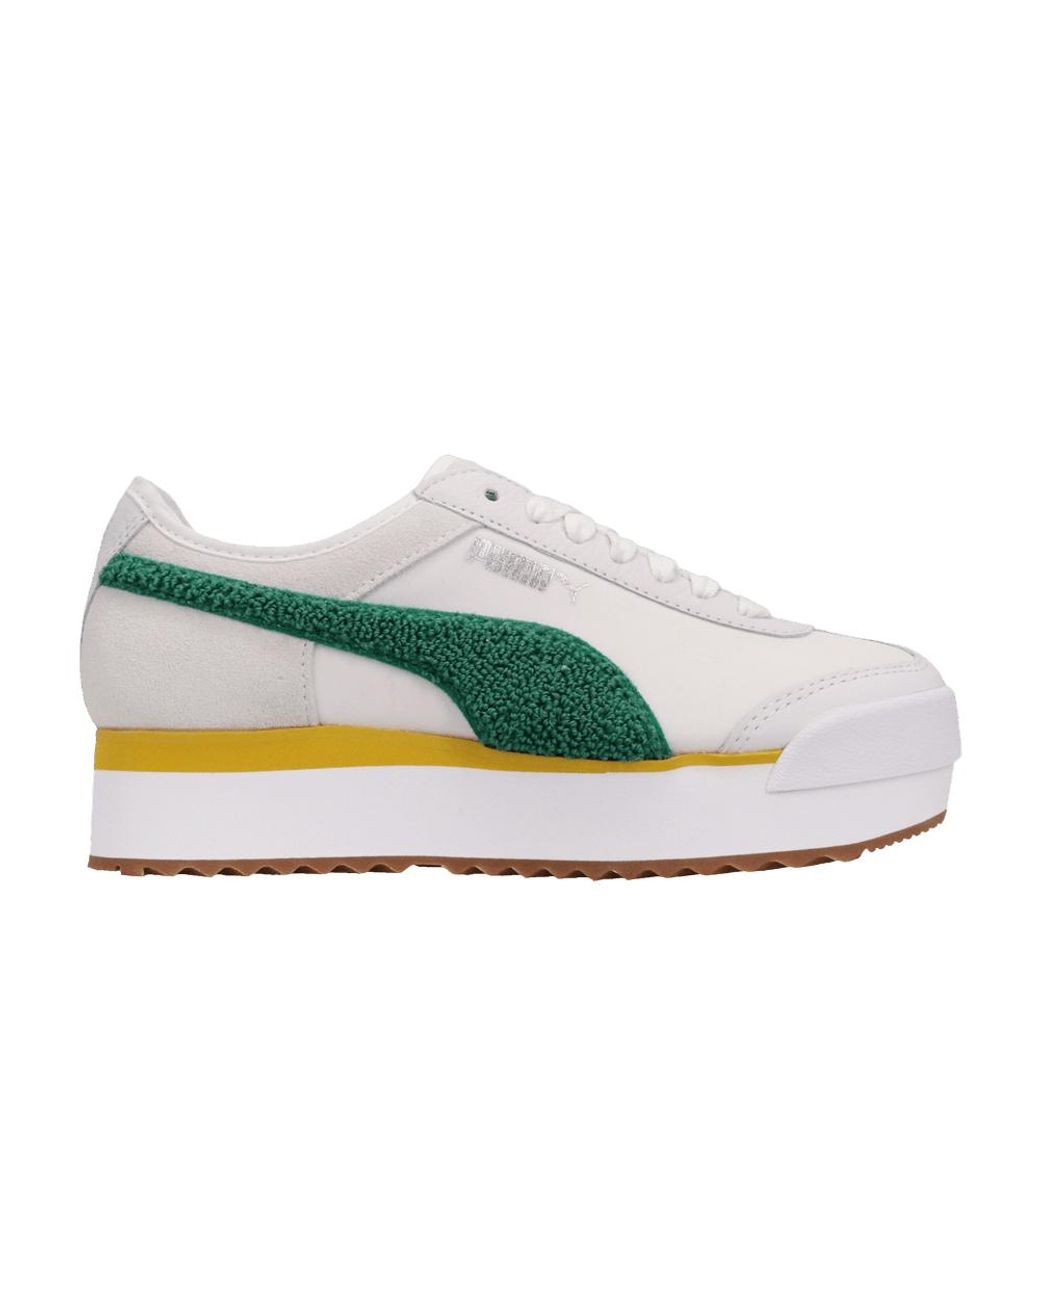 PUMA Roma Amor Heritage 'white Teal Green' in Blue | Lyst